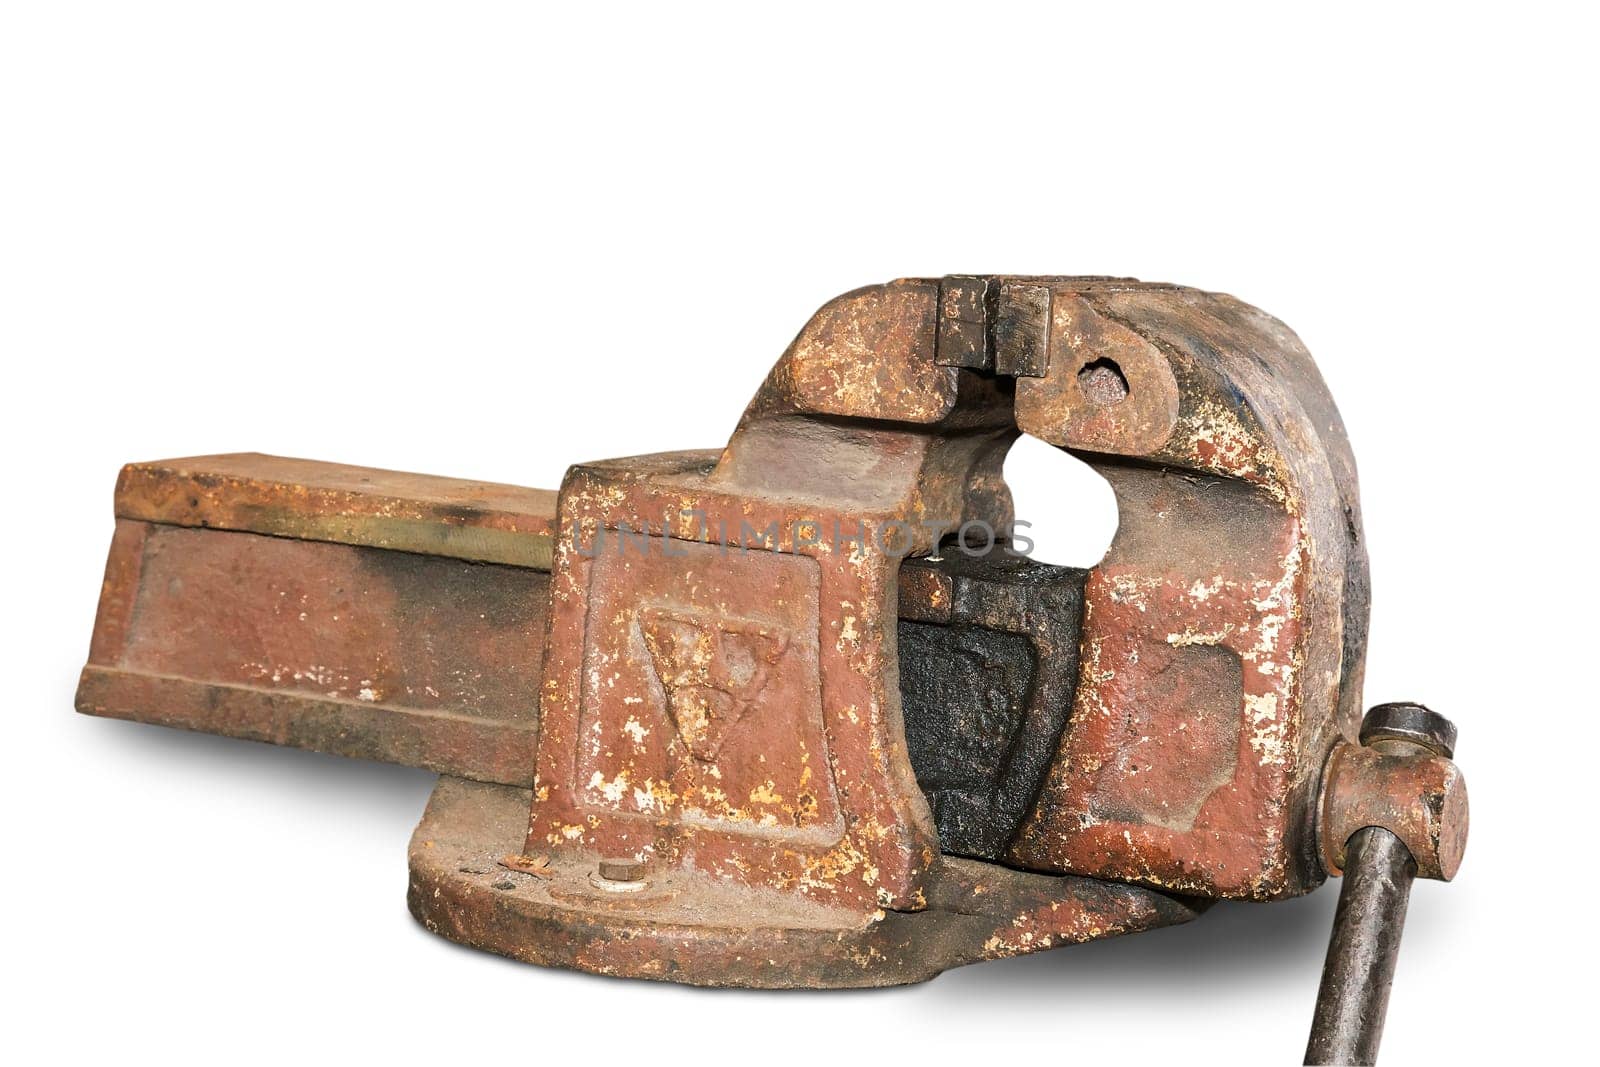 Large vintage cast iron vise for a variety of types of technical work. Presented on a white background.